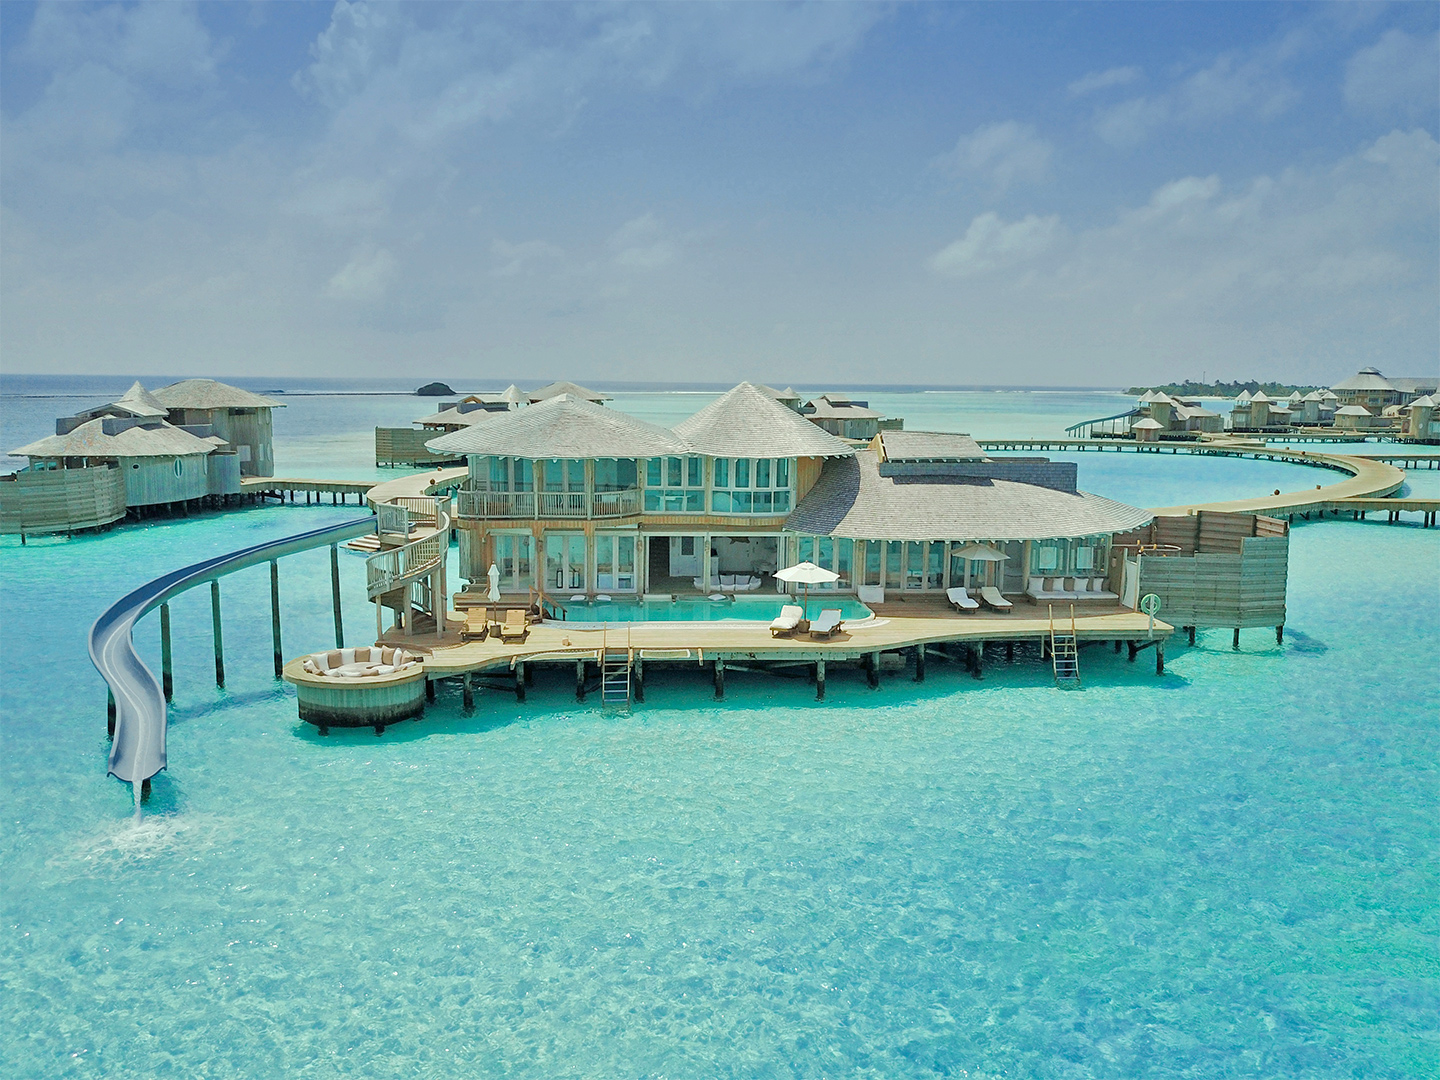 Become a resident at a luxury resort in the Maldives